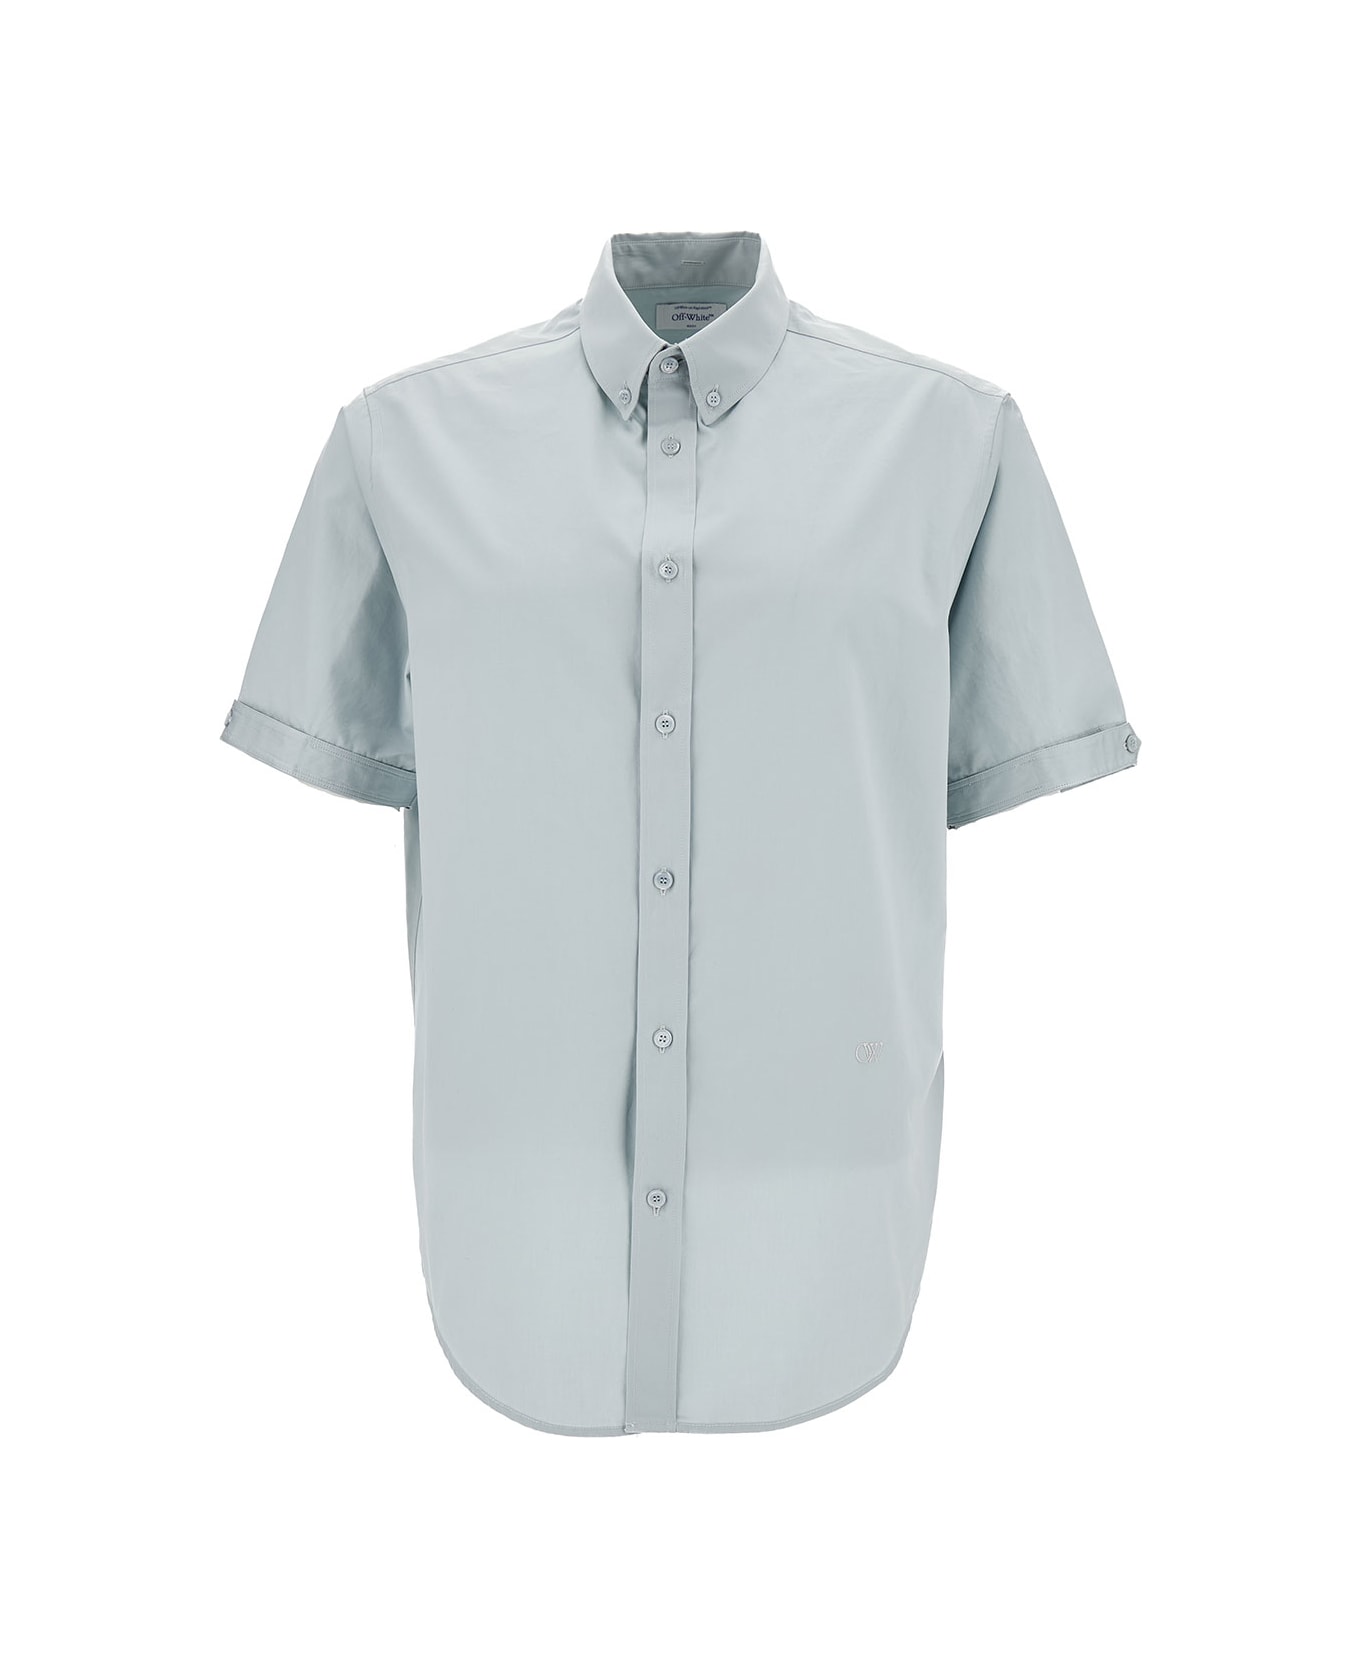 Off-White Short Sleeve Shirt With Button-down Collar - Grey シャツ